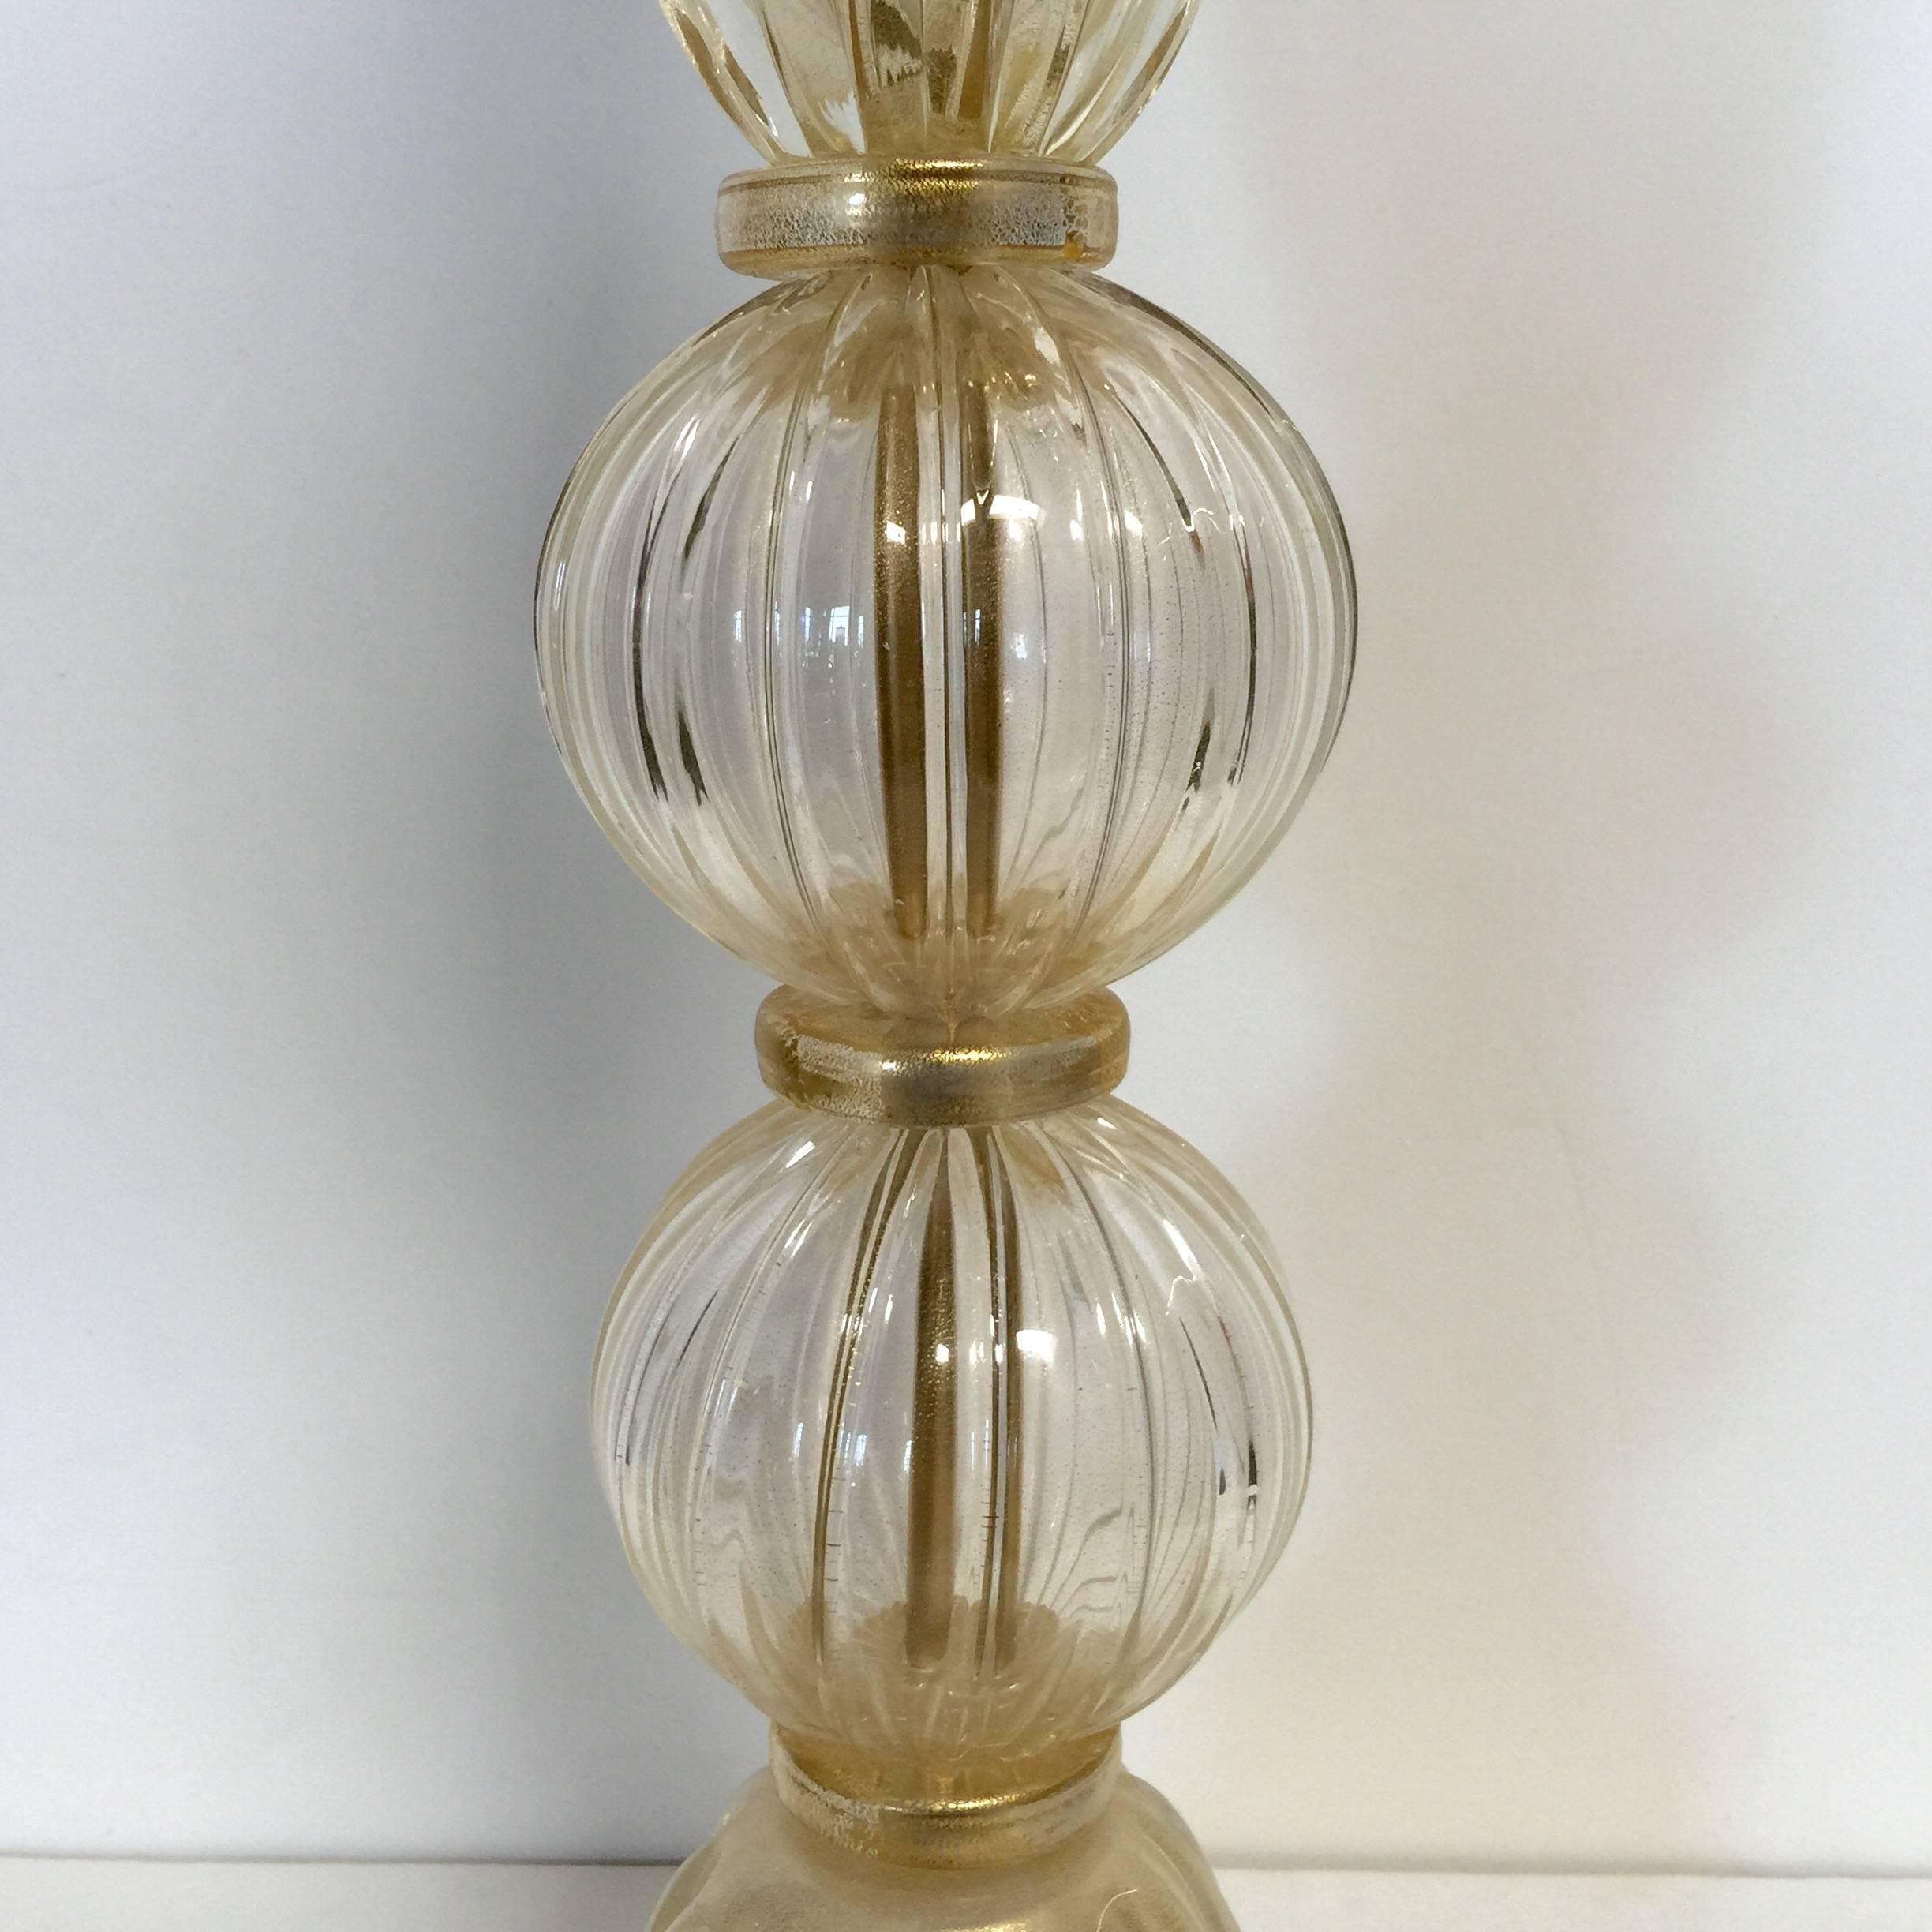 Pair of vintage Italian table lamps with gold infused Murano glass / Made in Italy in the 1960's
1 light / E26 or E27 type / max 60W
Height: 25.5 inches / Diameter: 7.5 inches 
1 pair in stock in Palm Springs ON FINAL CLEARANCE SALE for $1,599 for